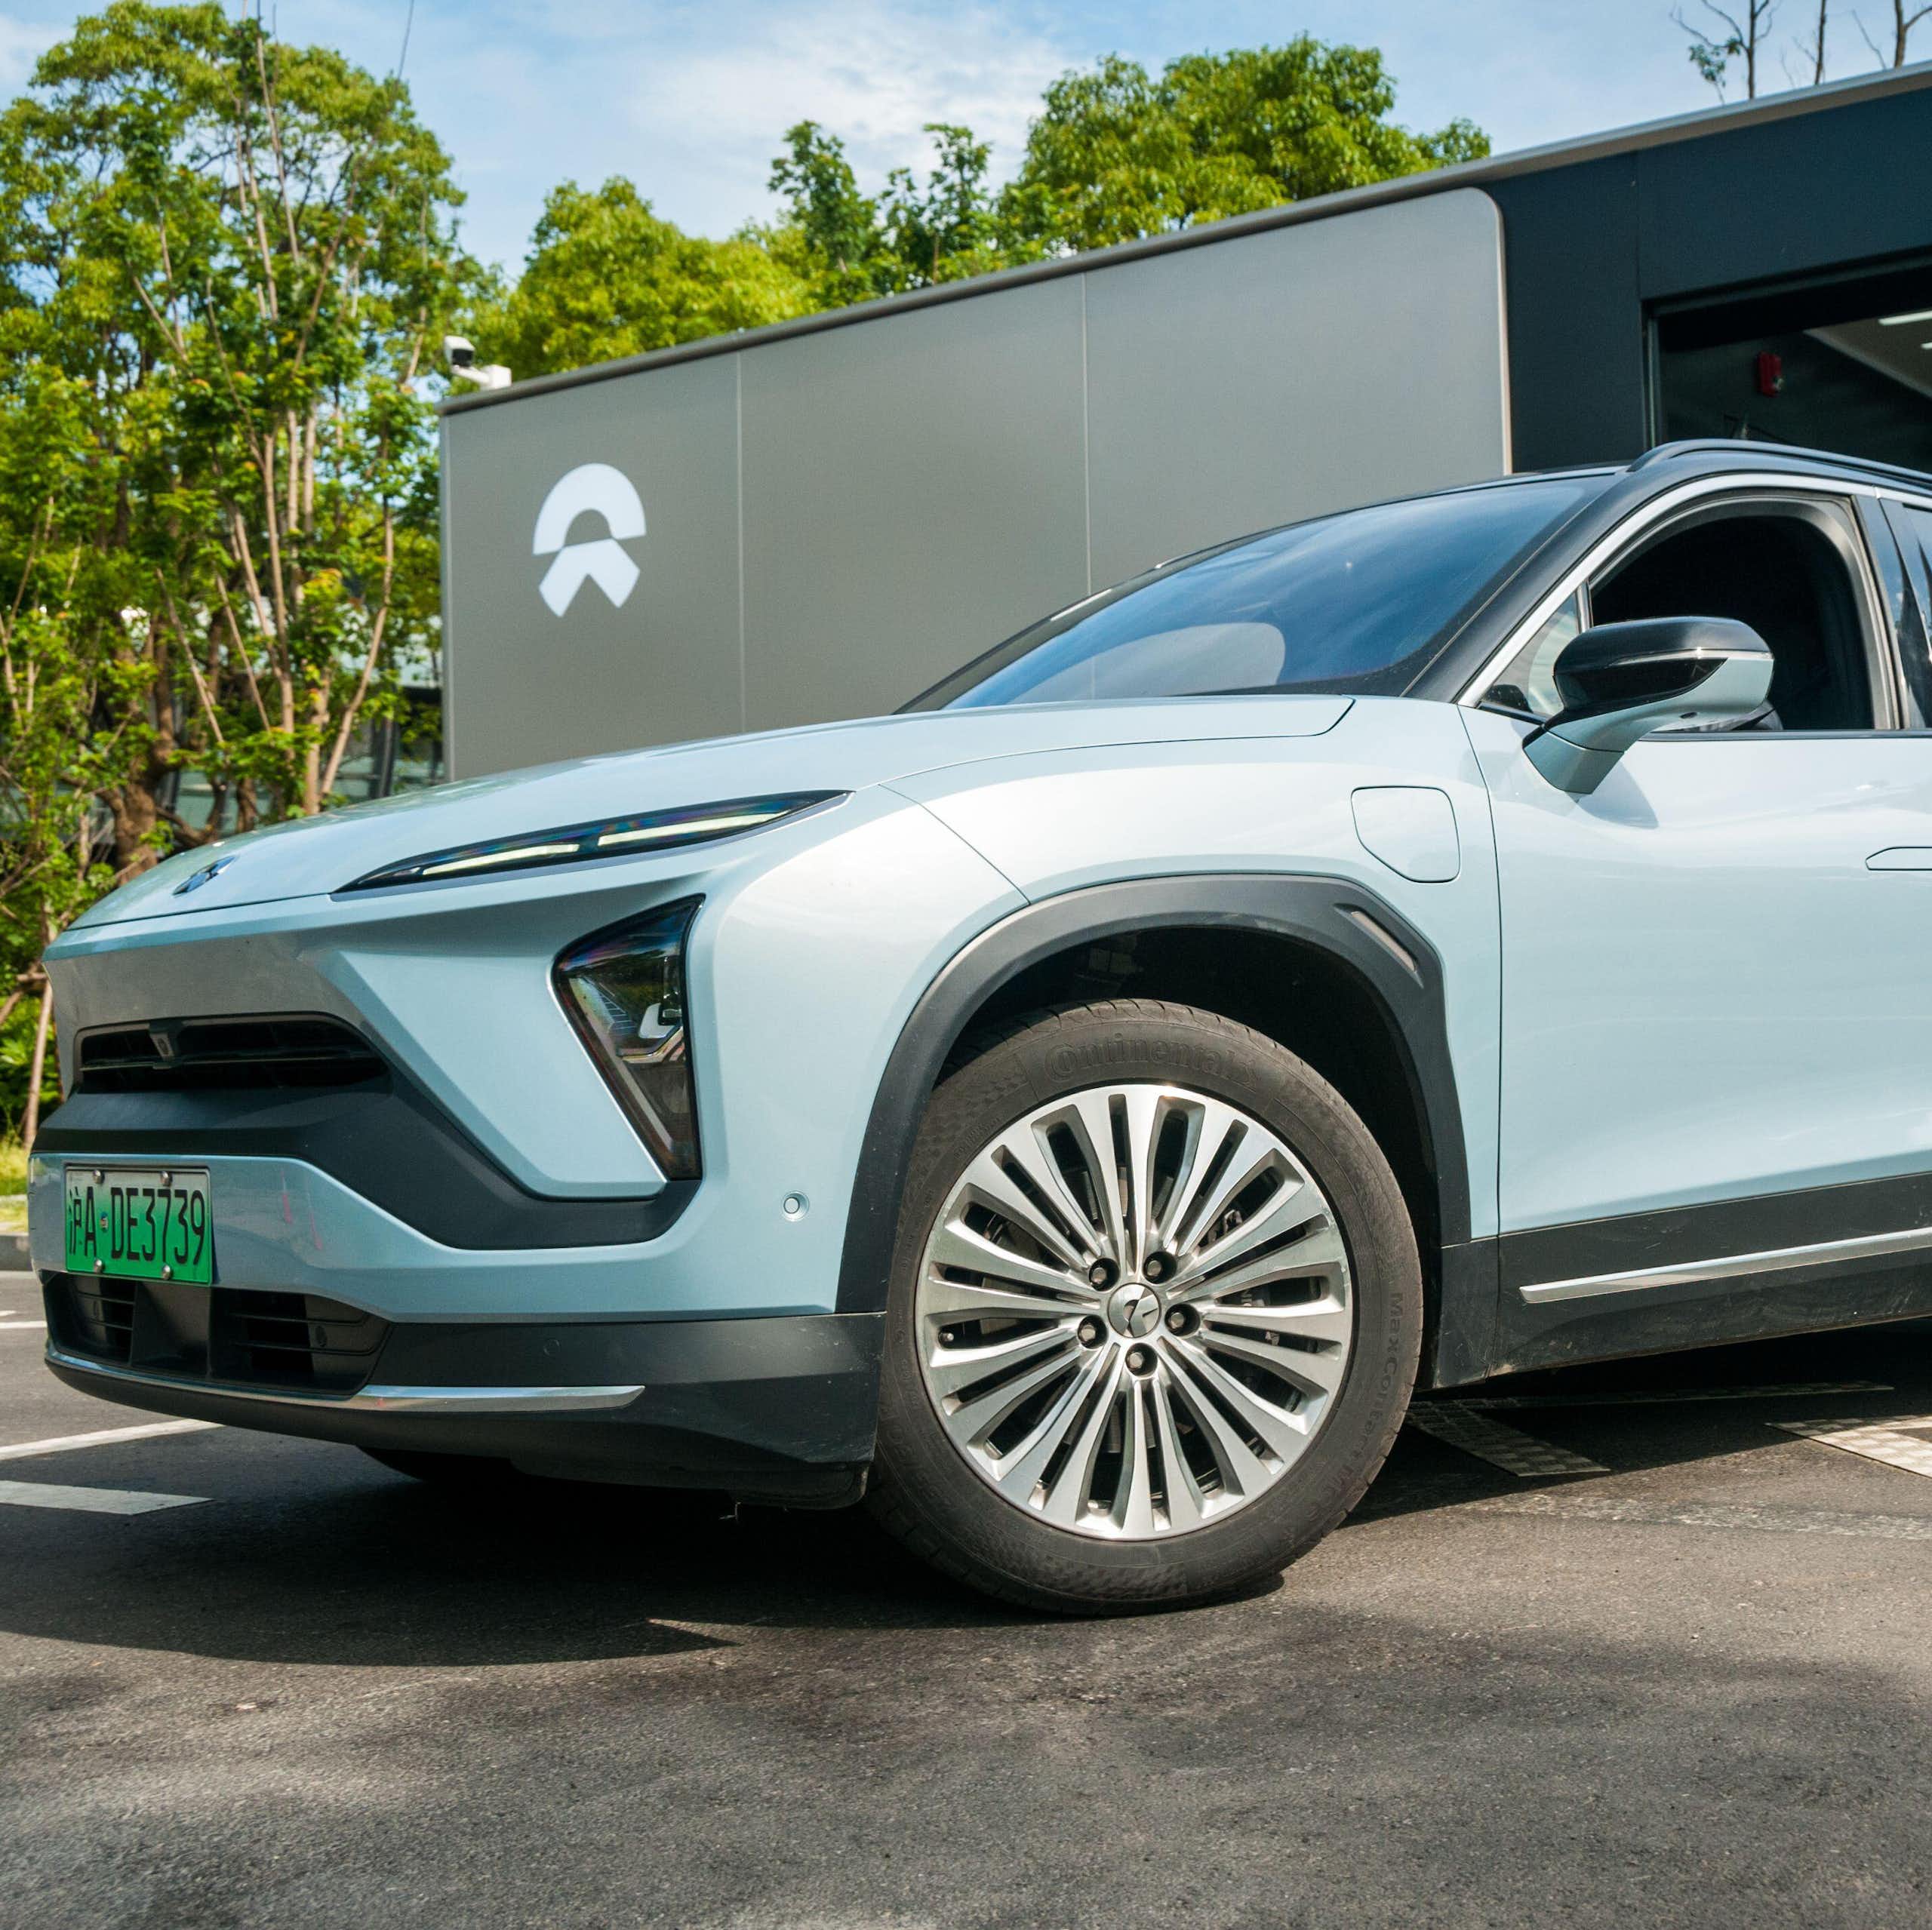 Nio car emerging from a battery swapping station in China